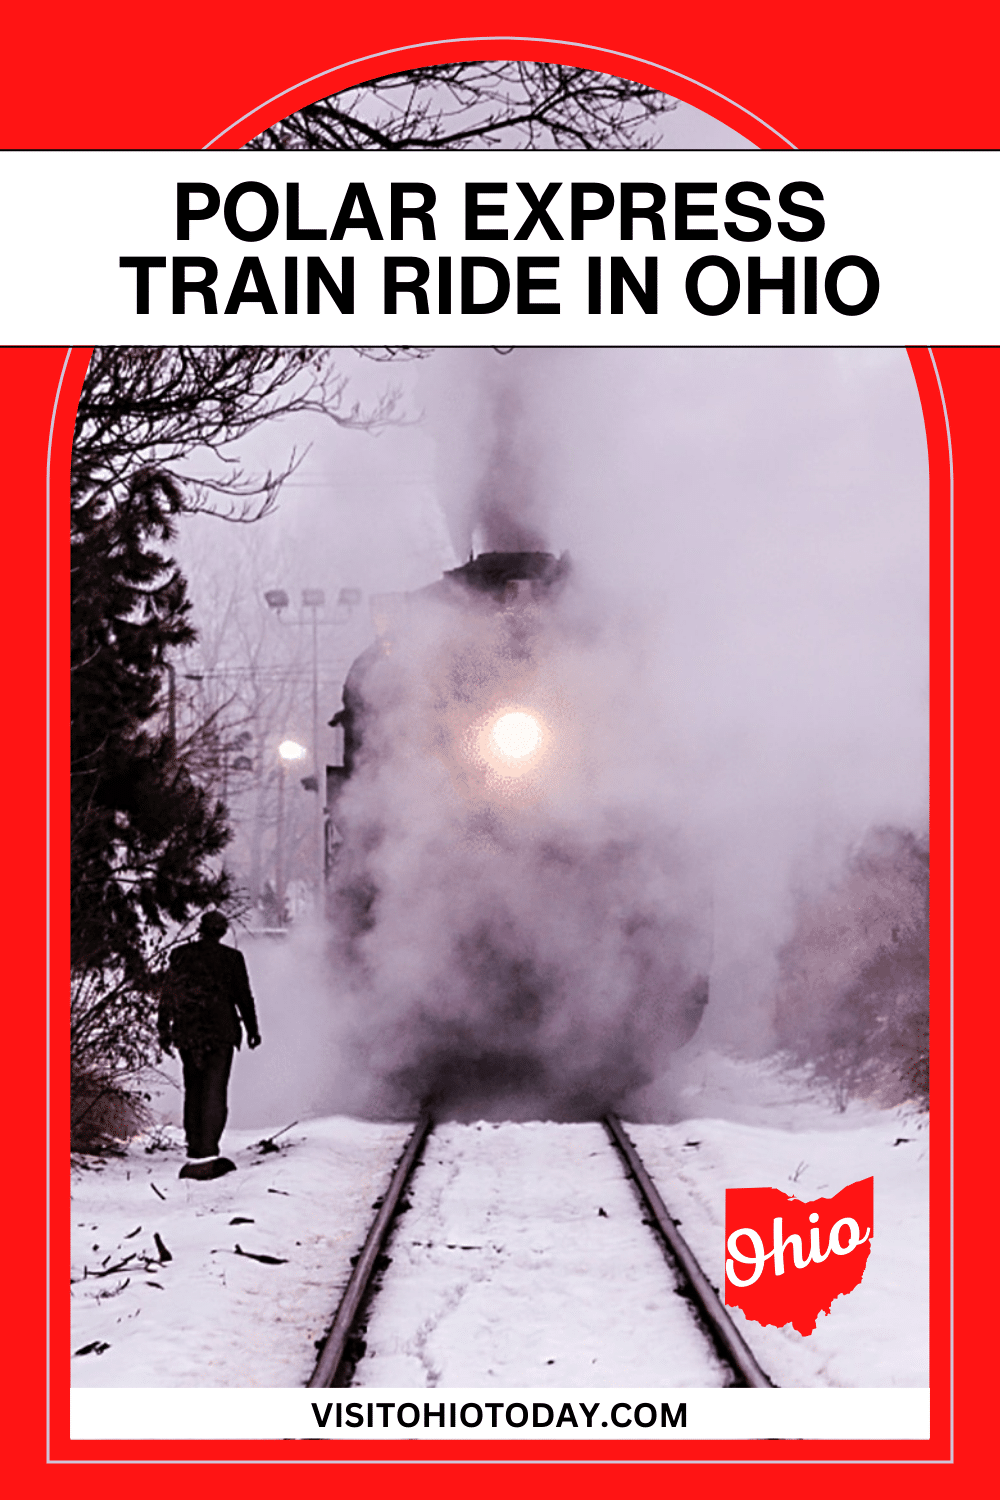 Make unforgettable memories this holiday season by riding the Polar Express Train Ride Ohio.  There are other fun festive train rides too.